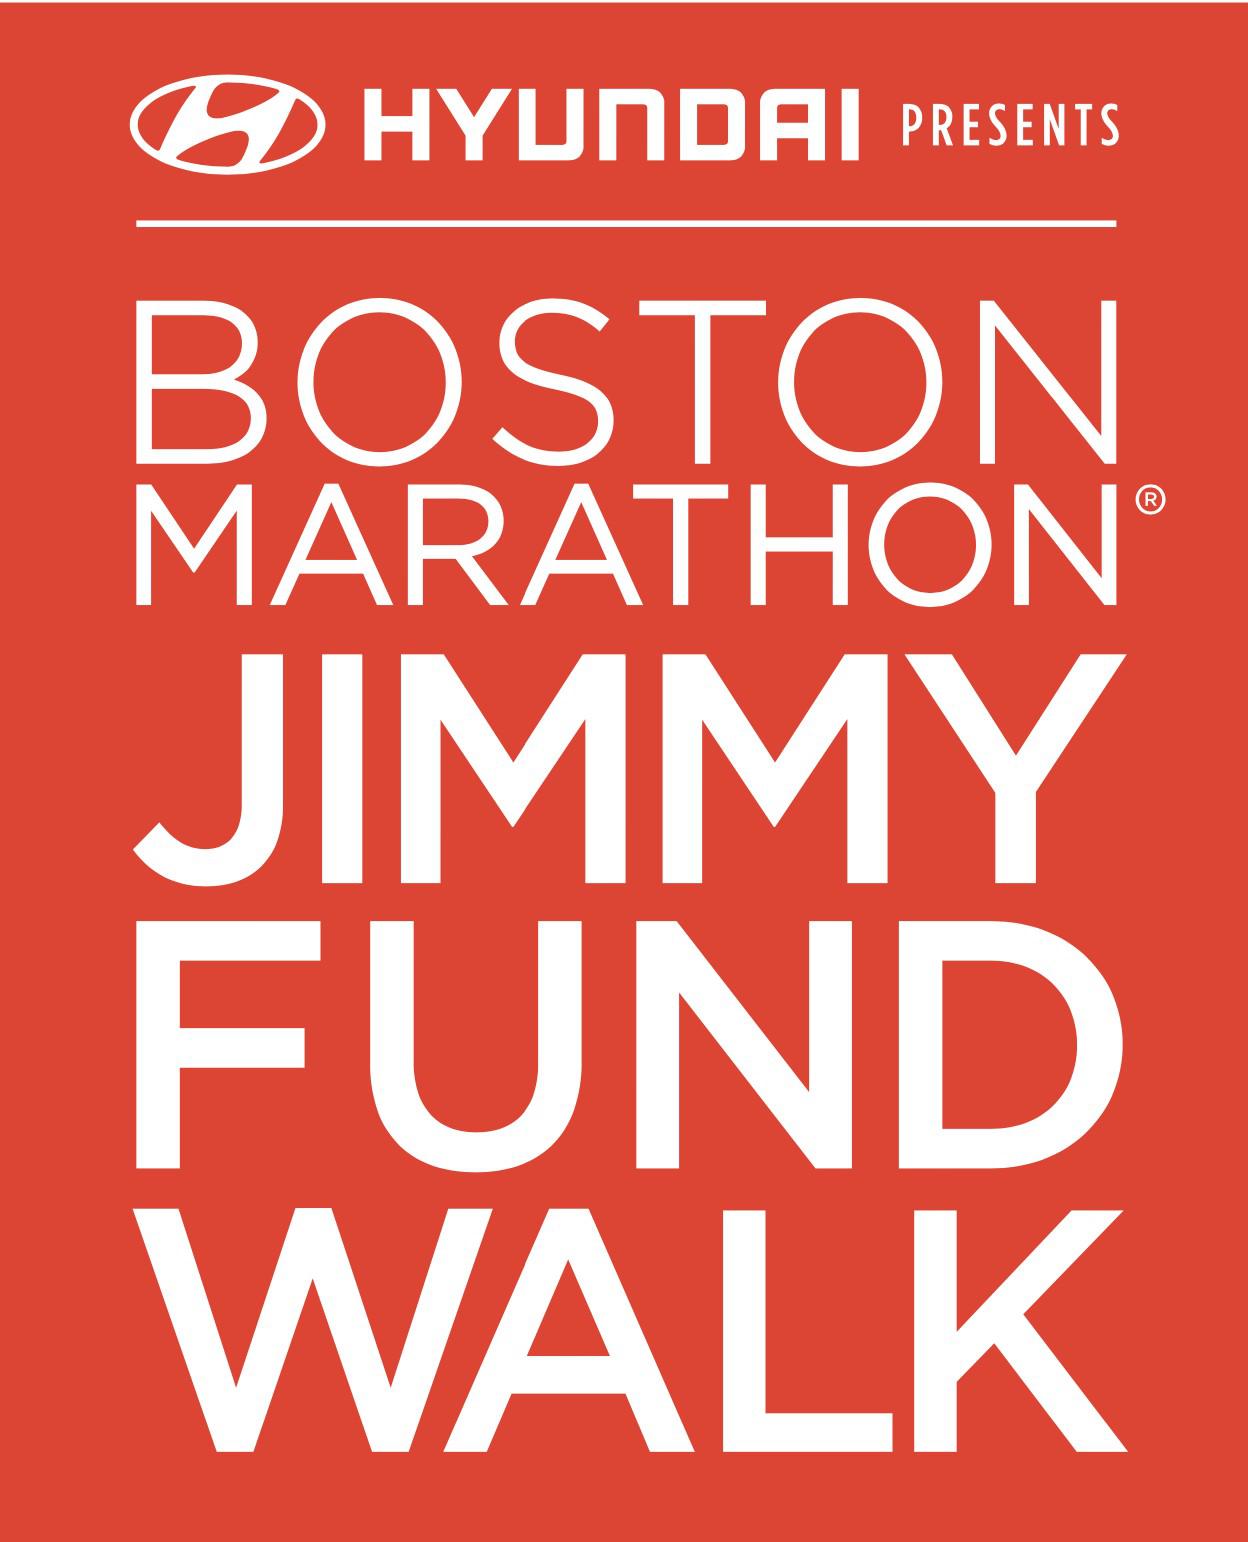 Boston Marathon® Jimmy Fund Walk is Back on the Course in 2022 AP News